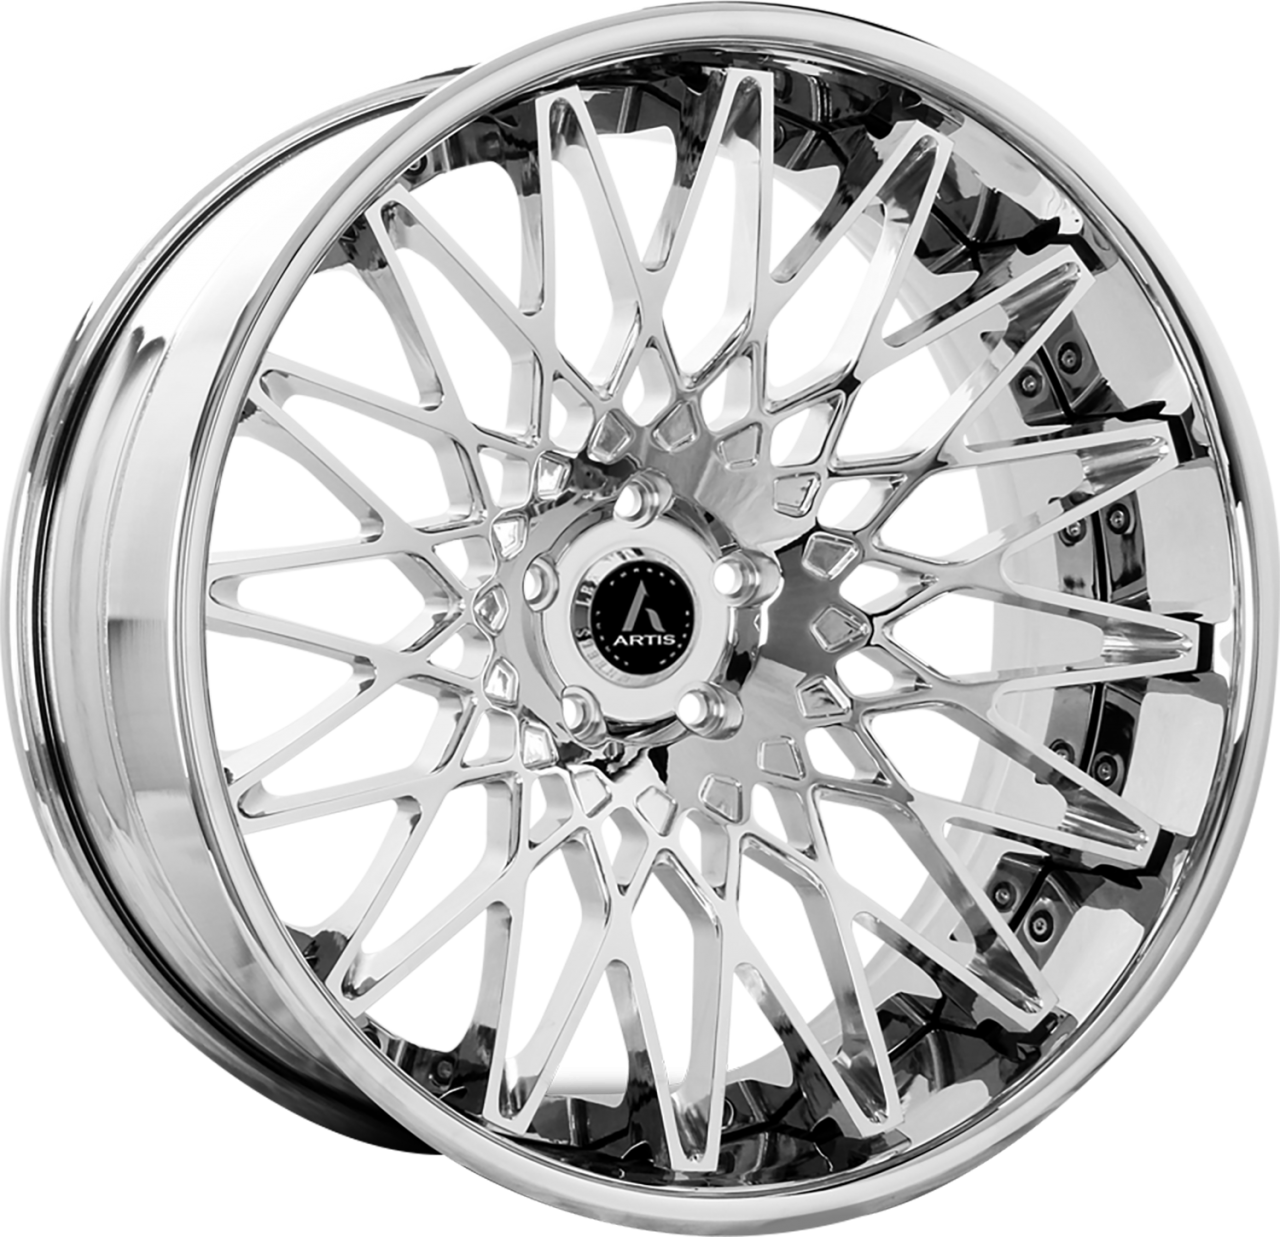 Artis Forged Monza wheel with Chrome finish